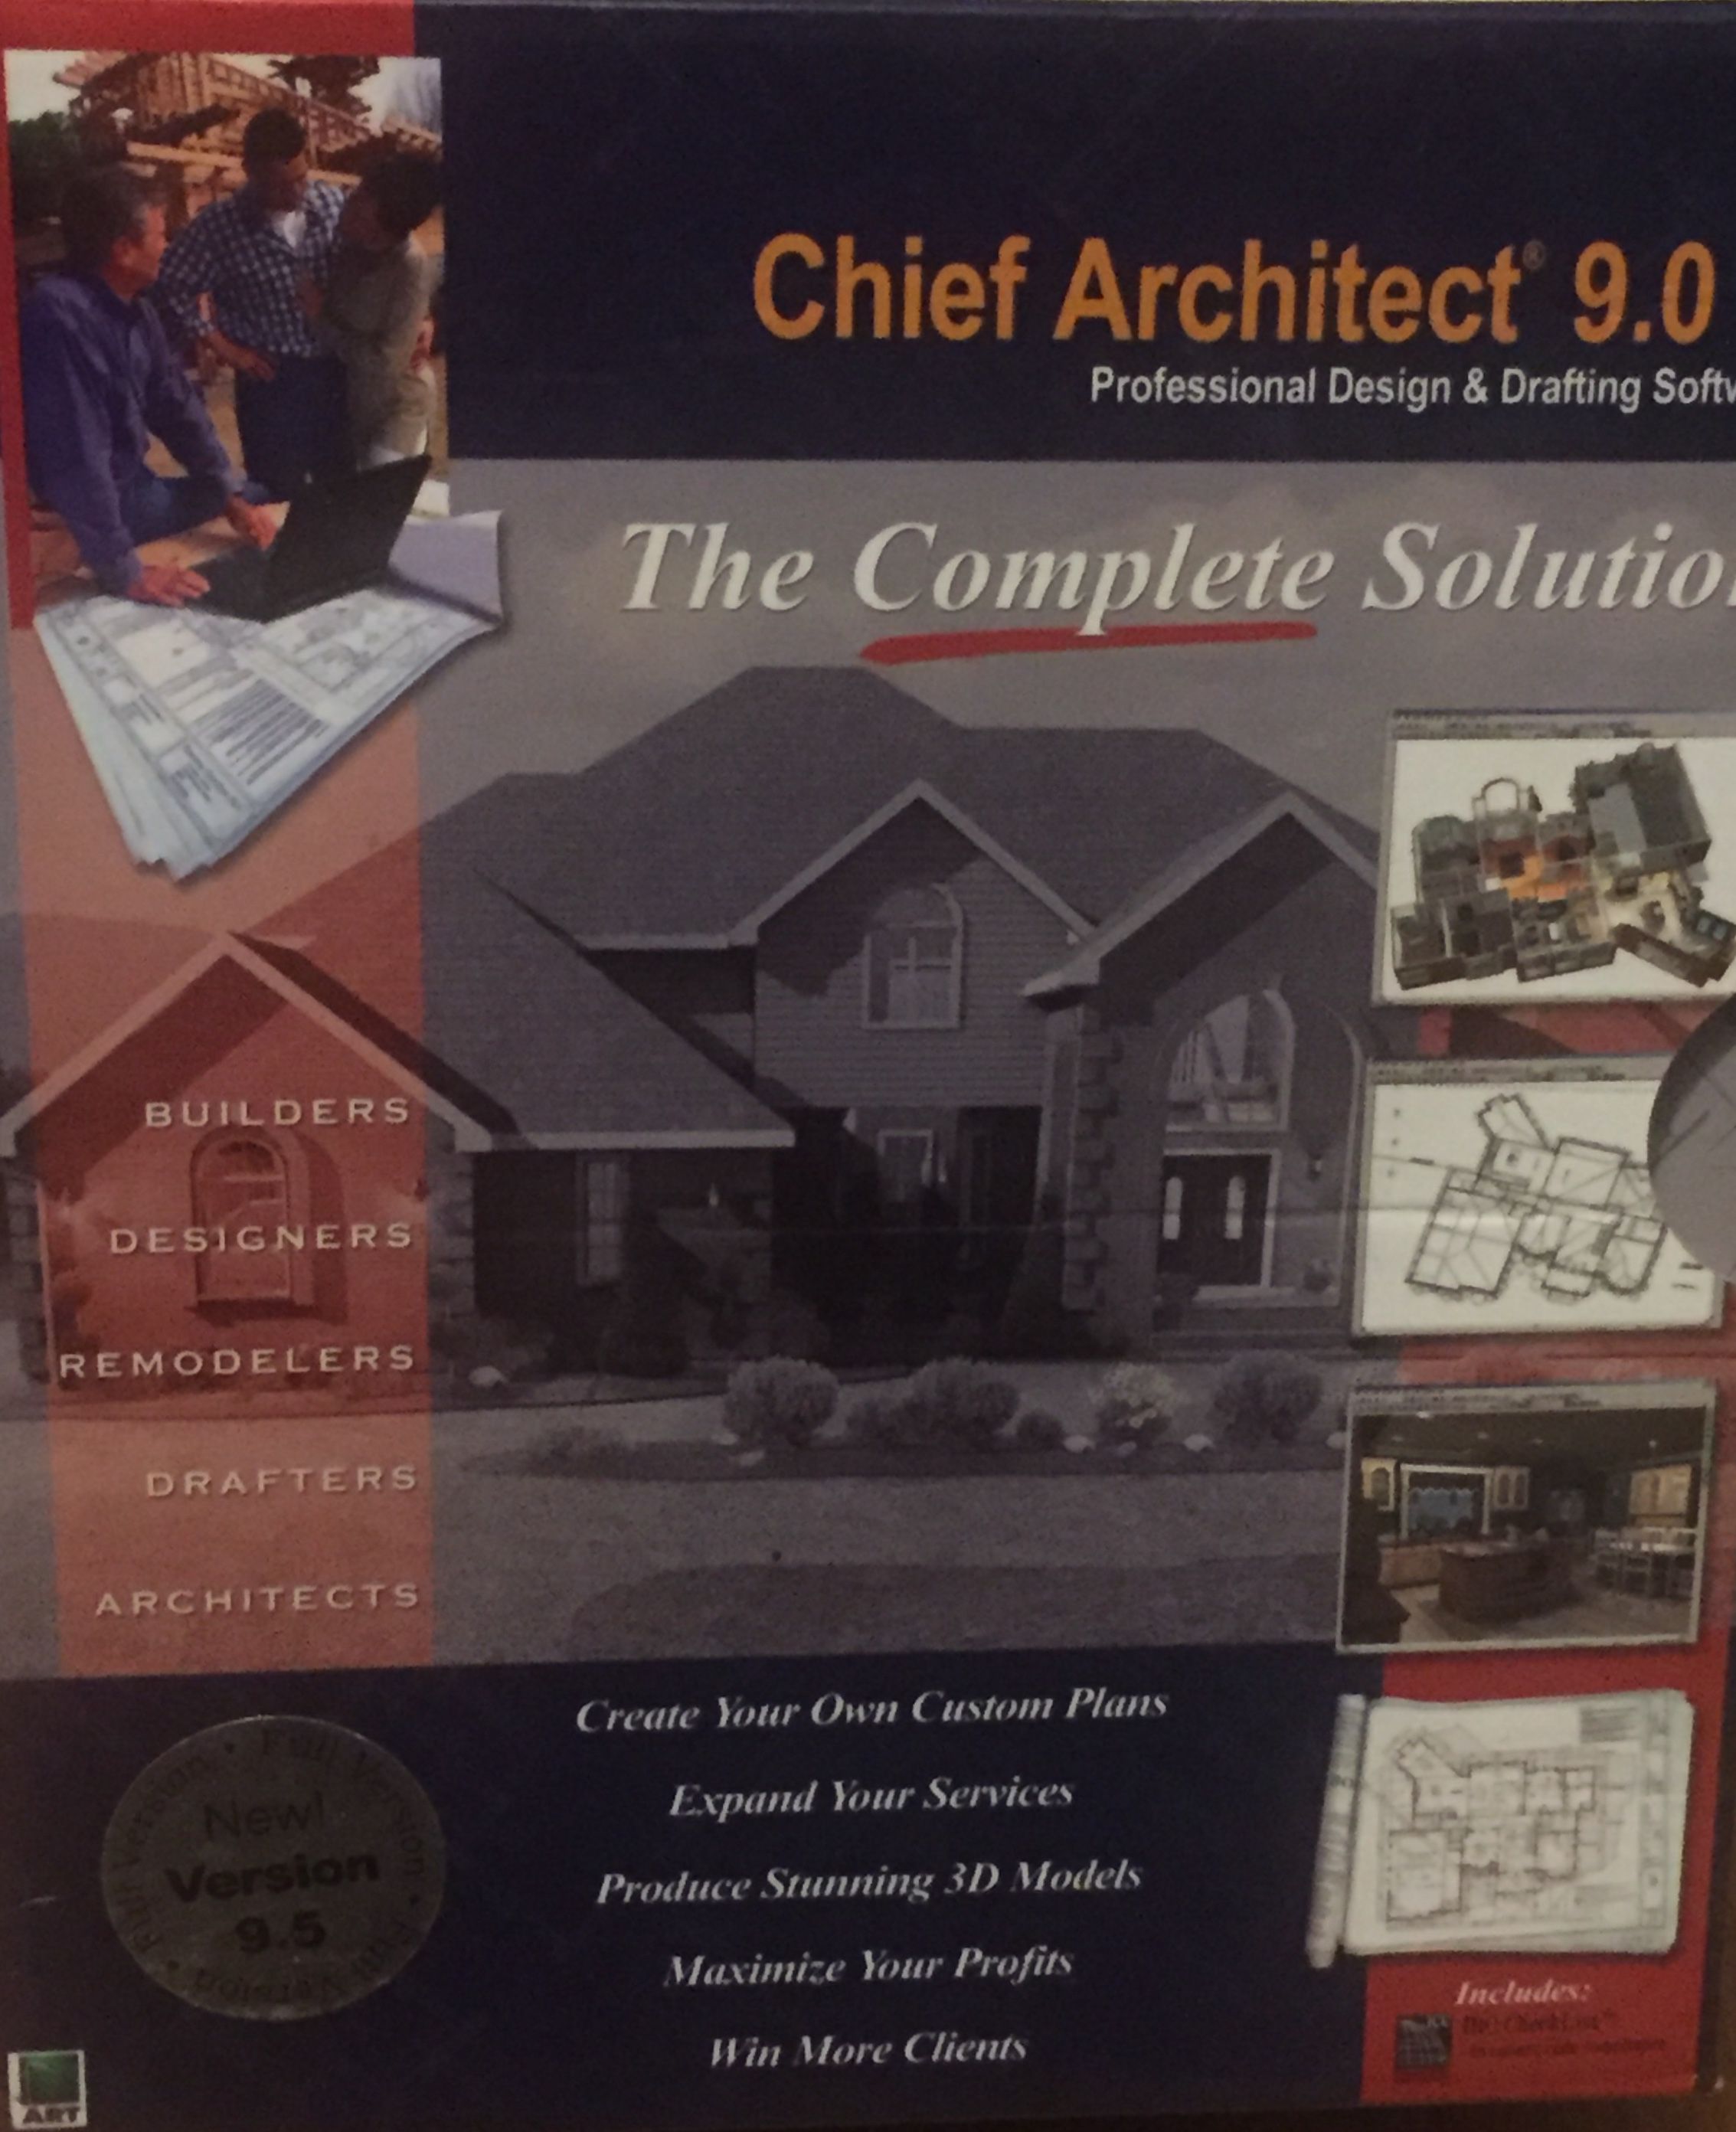 Chief Architect 9.0 & 9.5 Upgrade Professional Design & Drafting Software The Complete Solution